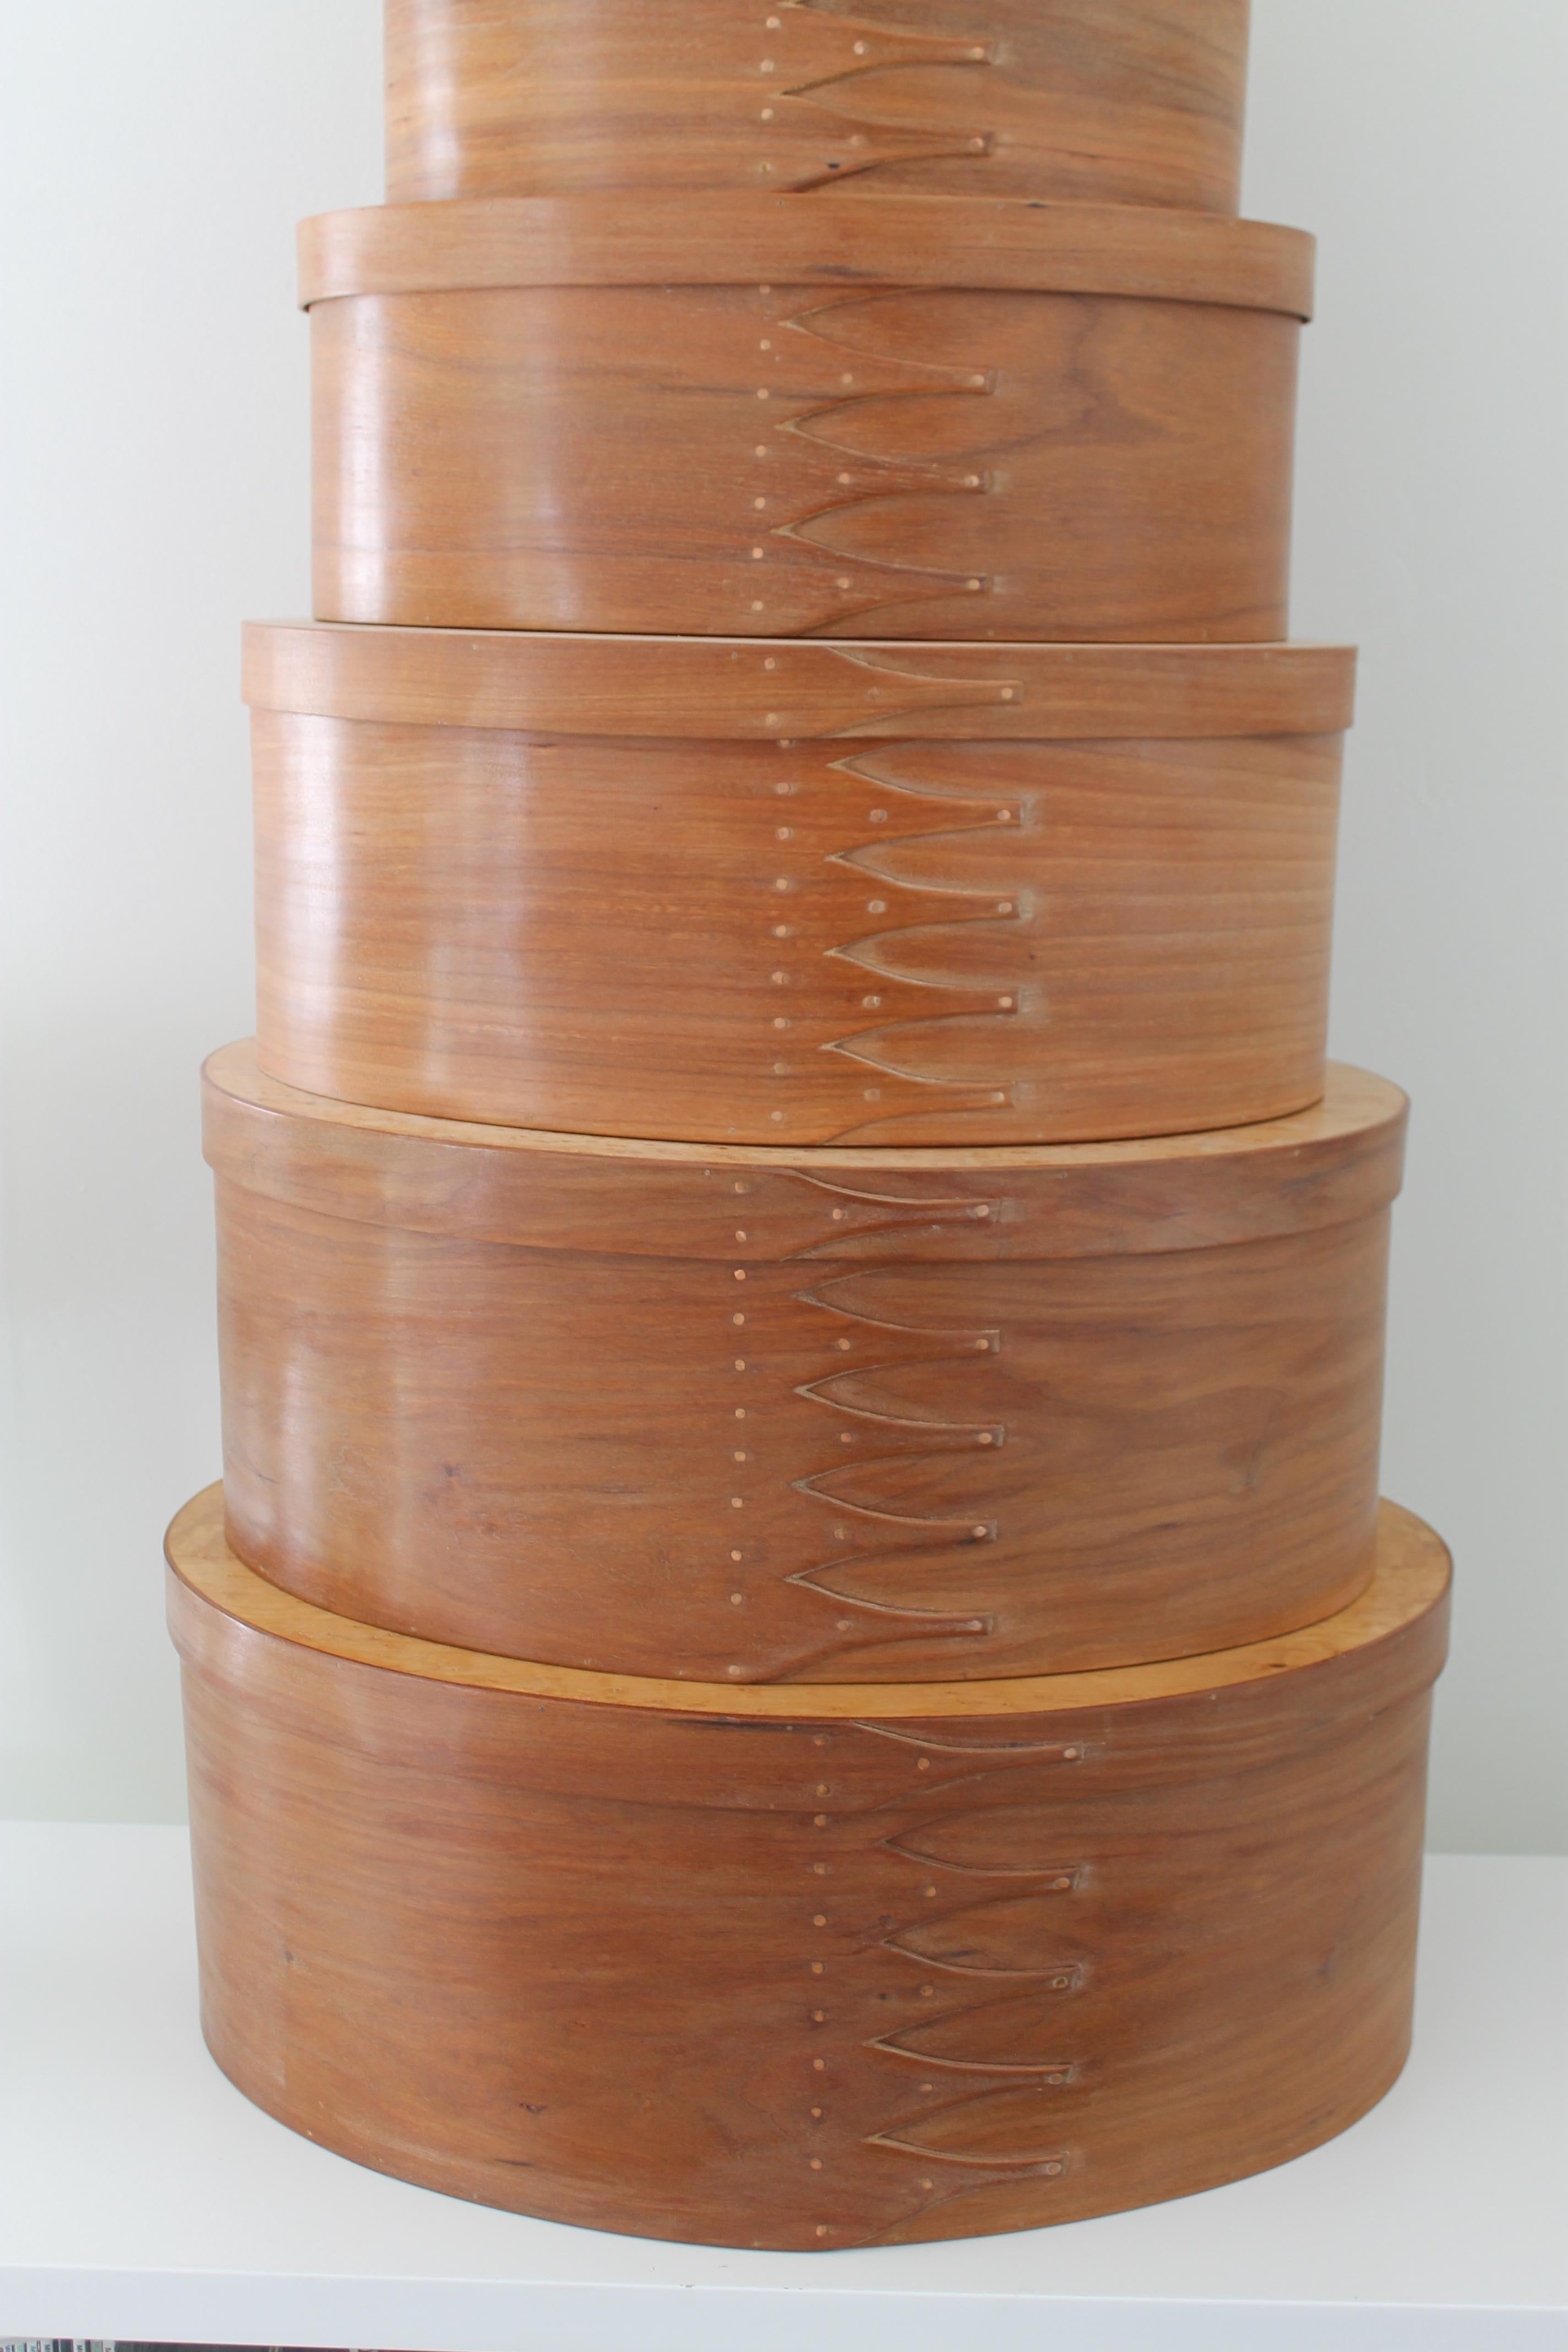 Set of eleven stacking handmade Shaker boxes signed James Lynch for the Dahl Company out of Portland, Maine circa 2001. These were purchased new in 2001 and were never taken out of their original wrapping until recently. Absolutely mint and so